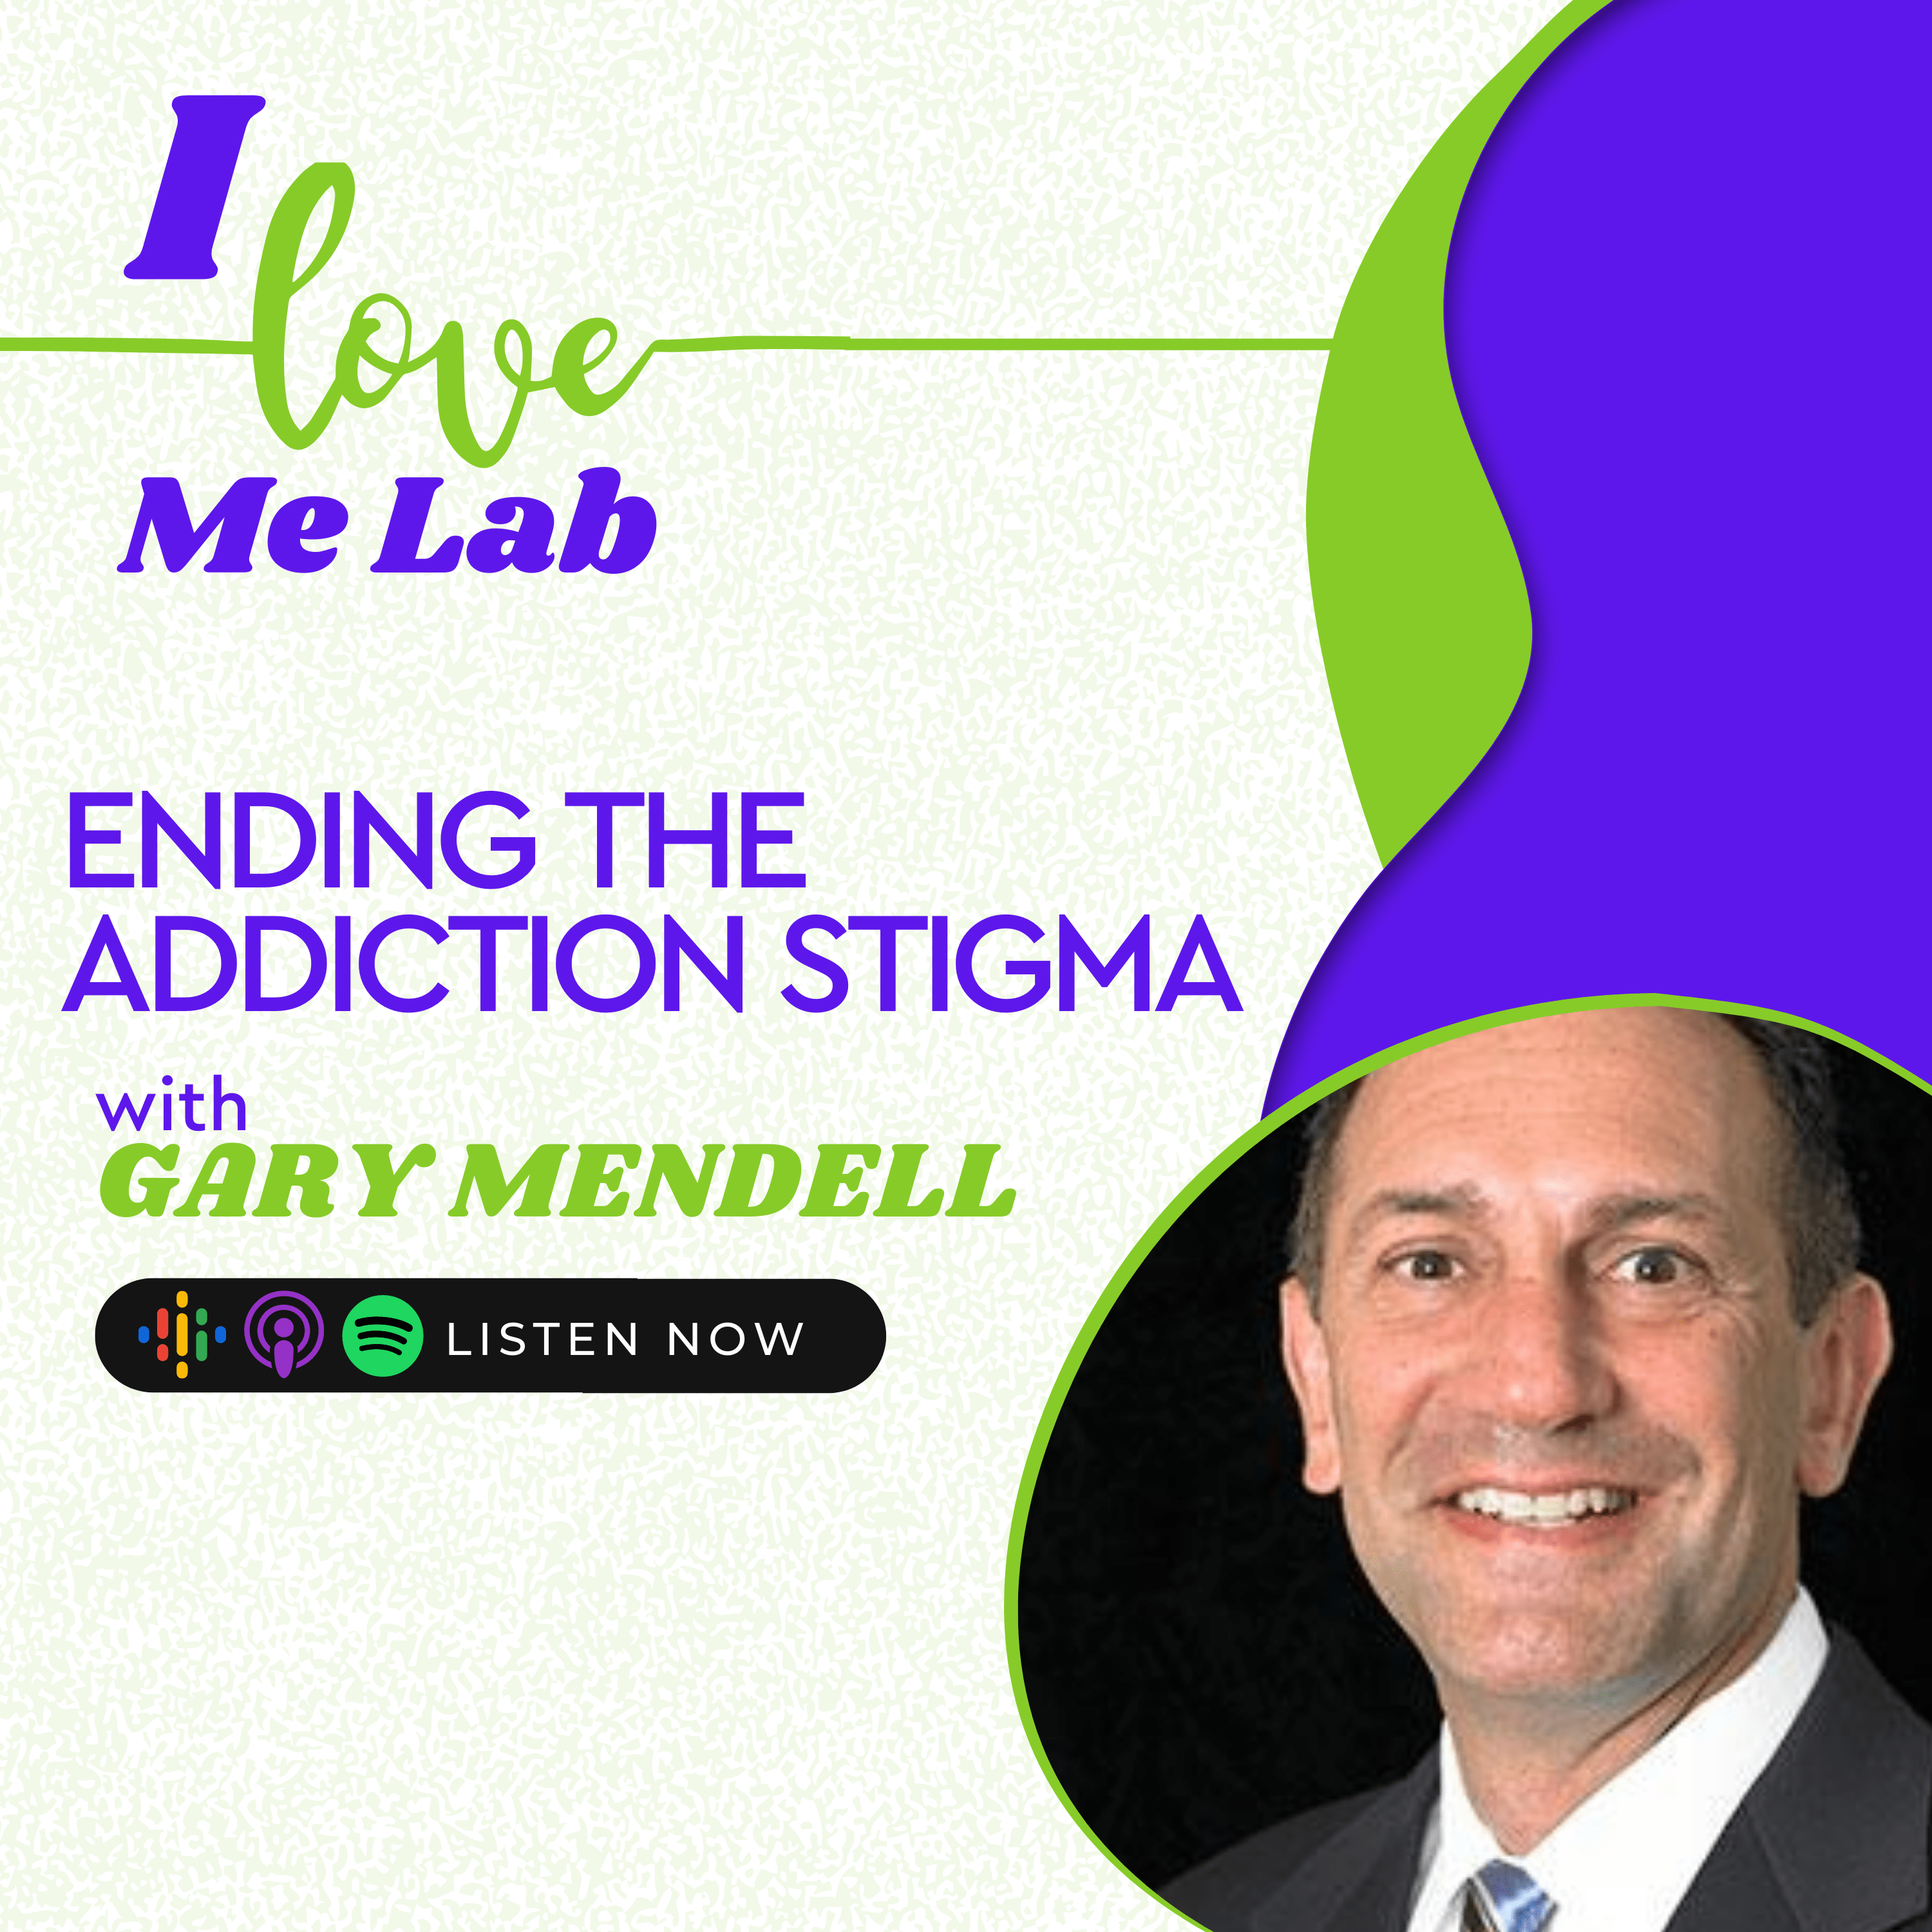 Ending the Addiction Stigma With Gary Mendell